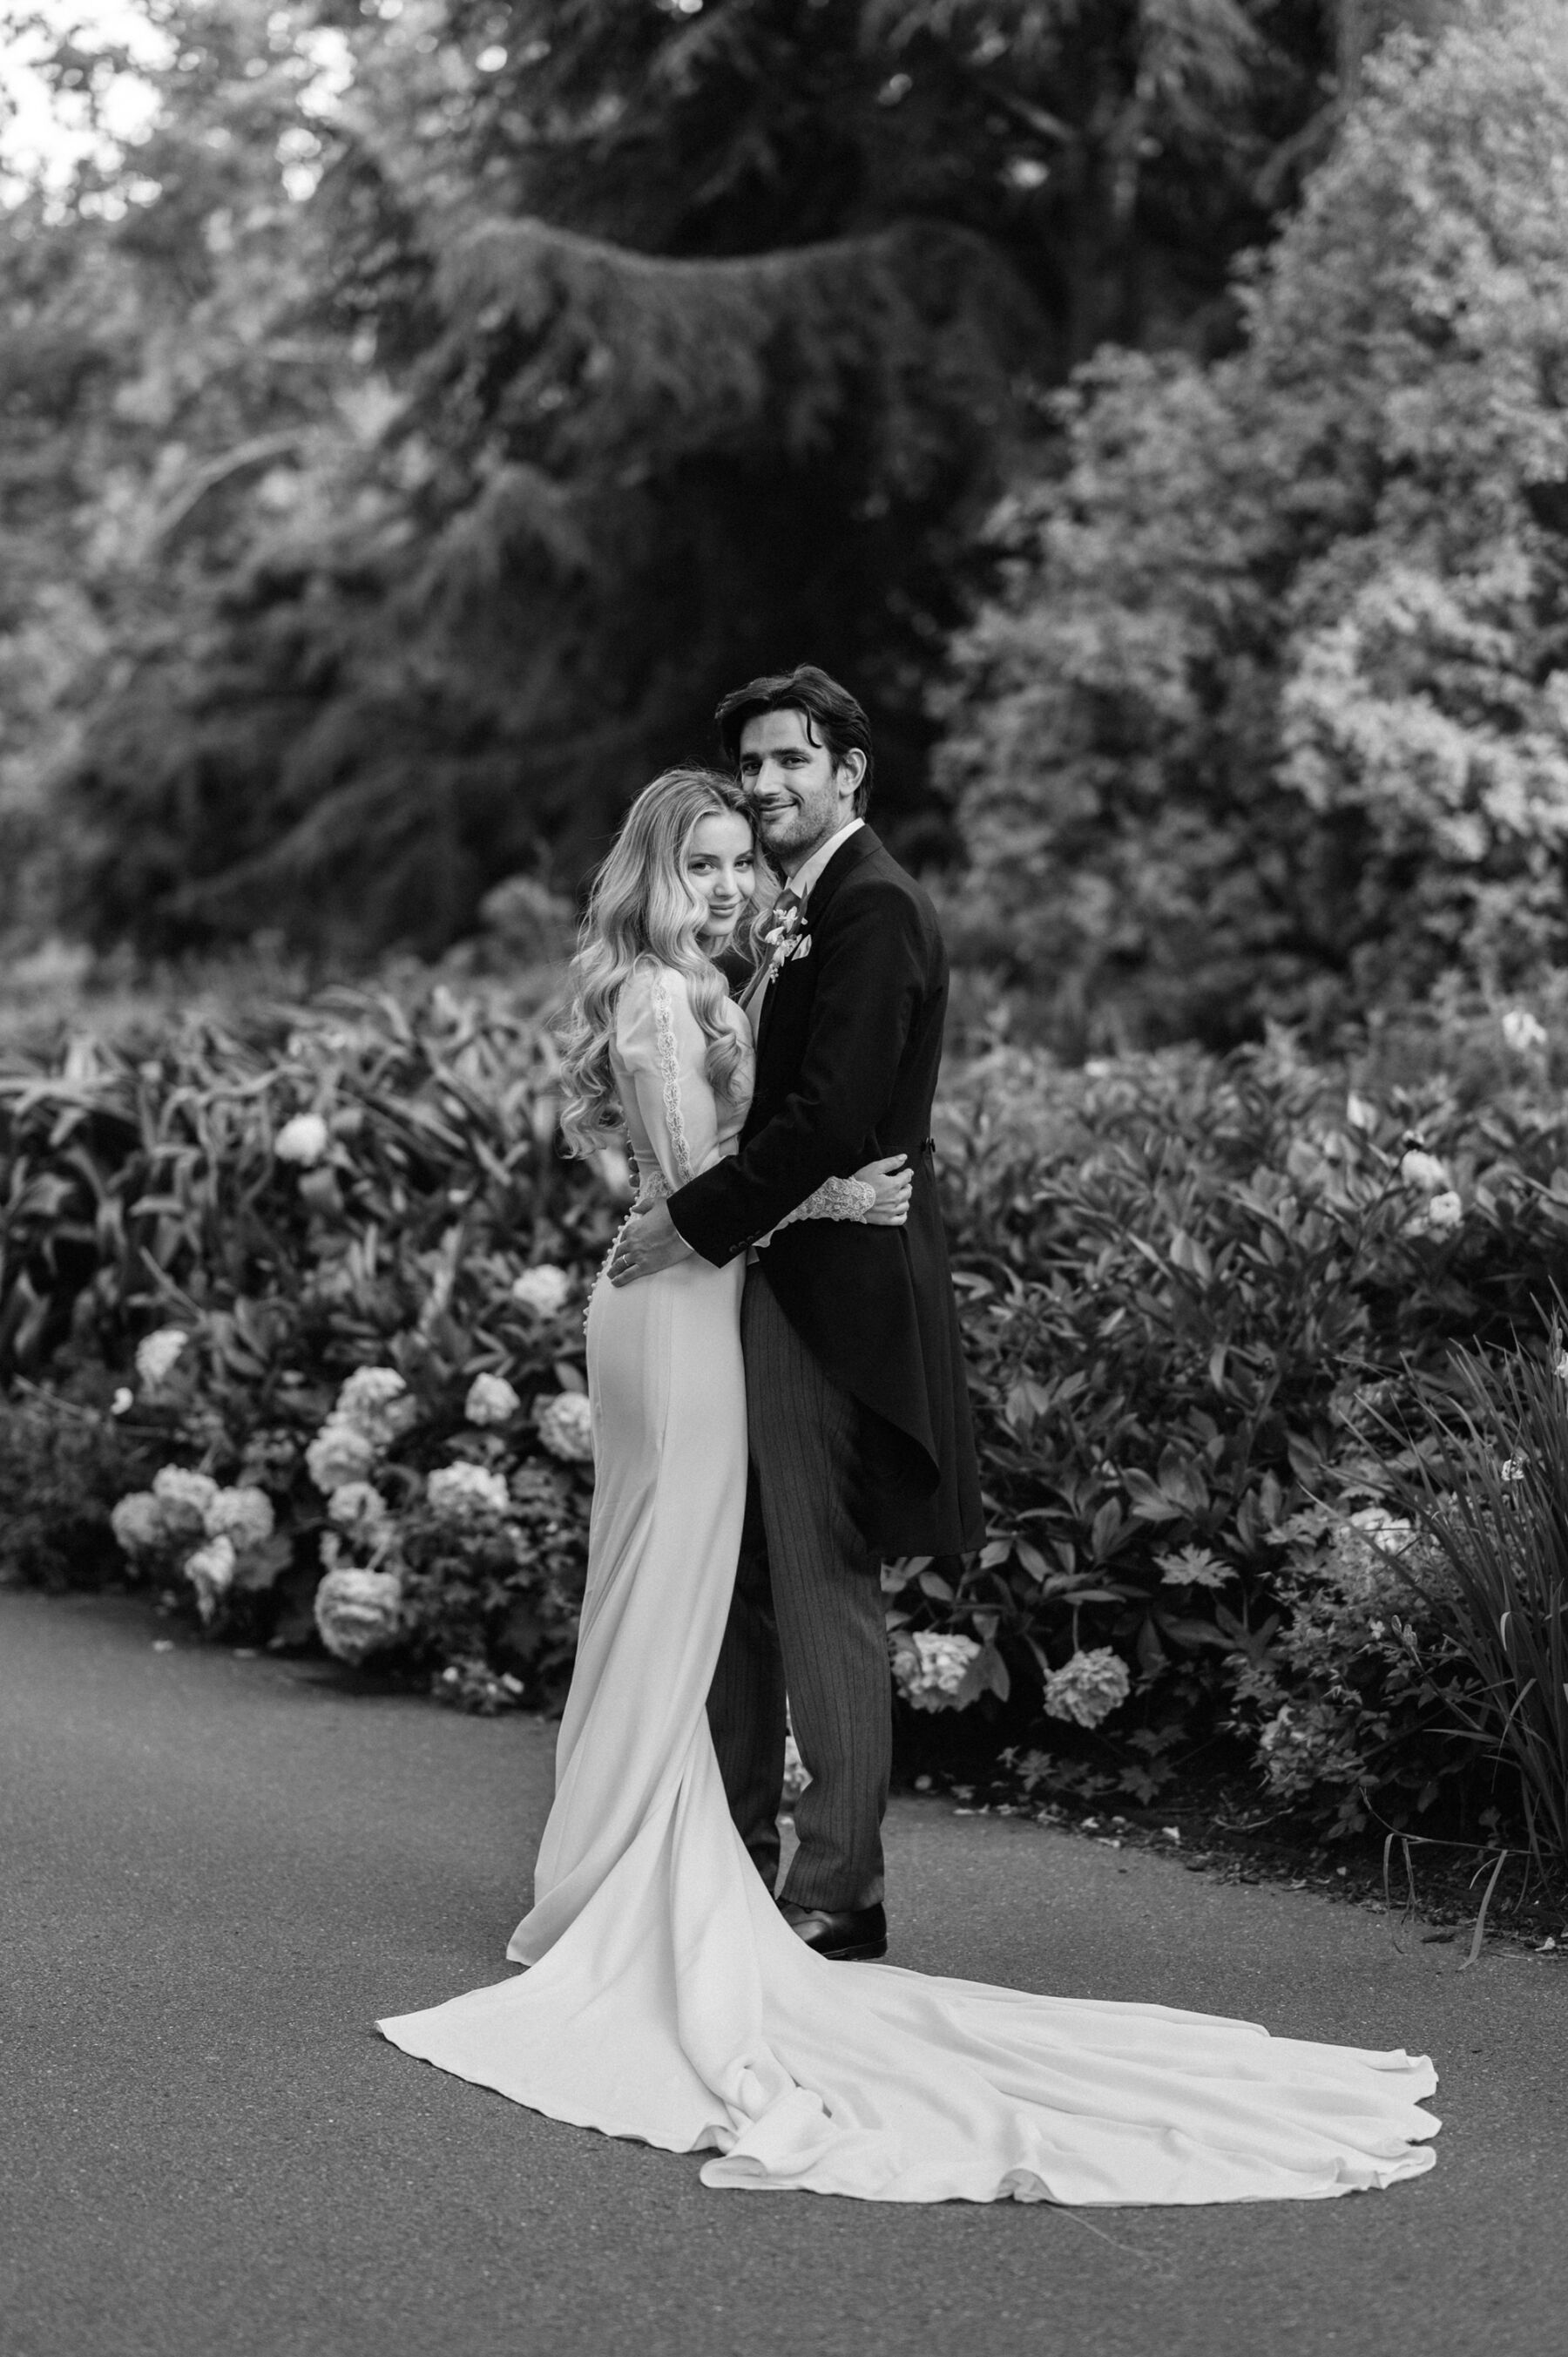 Black and white shot of bride and groom embracing in a garden. Bride wears Rosa Clara wedding dress.